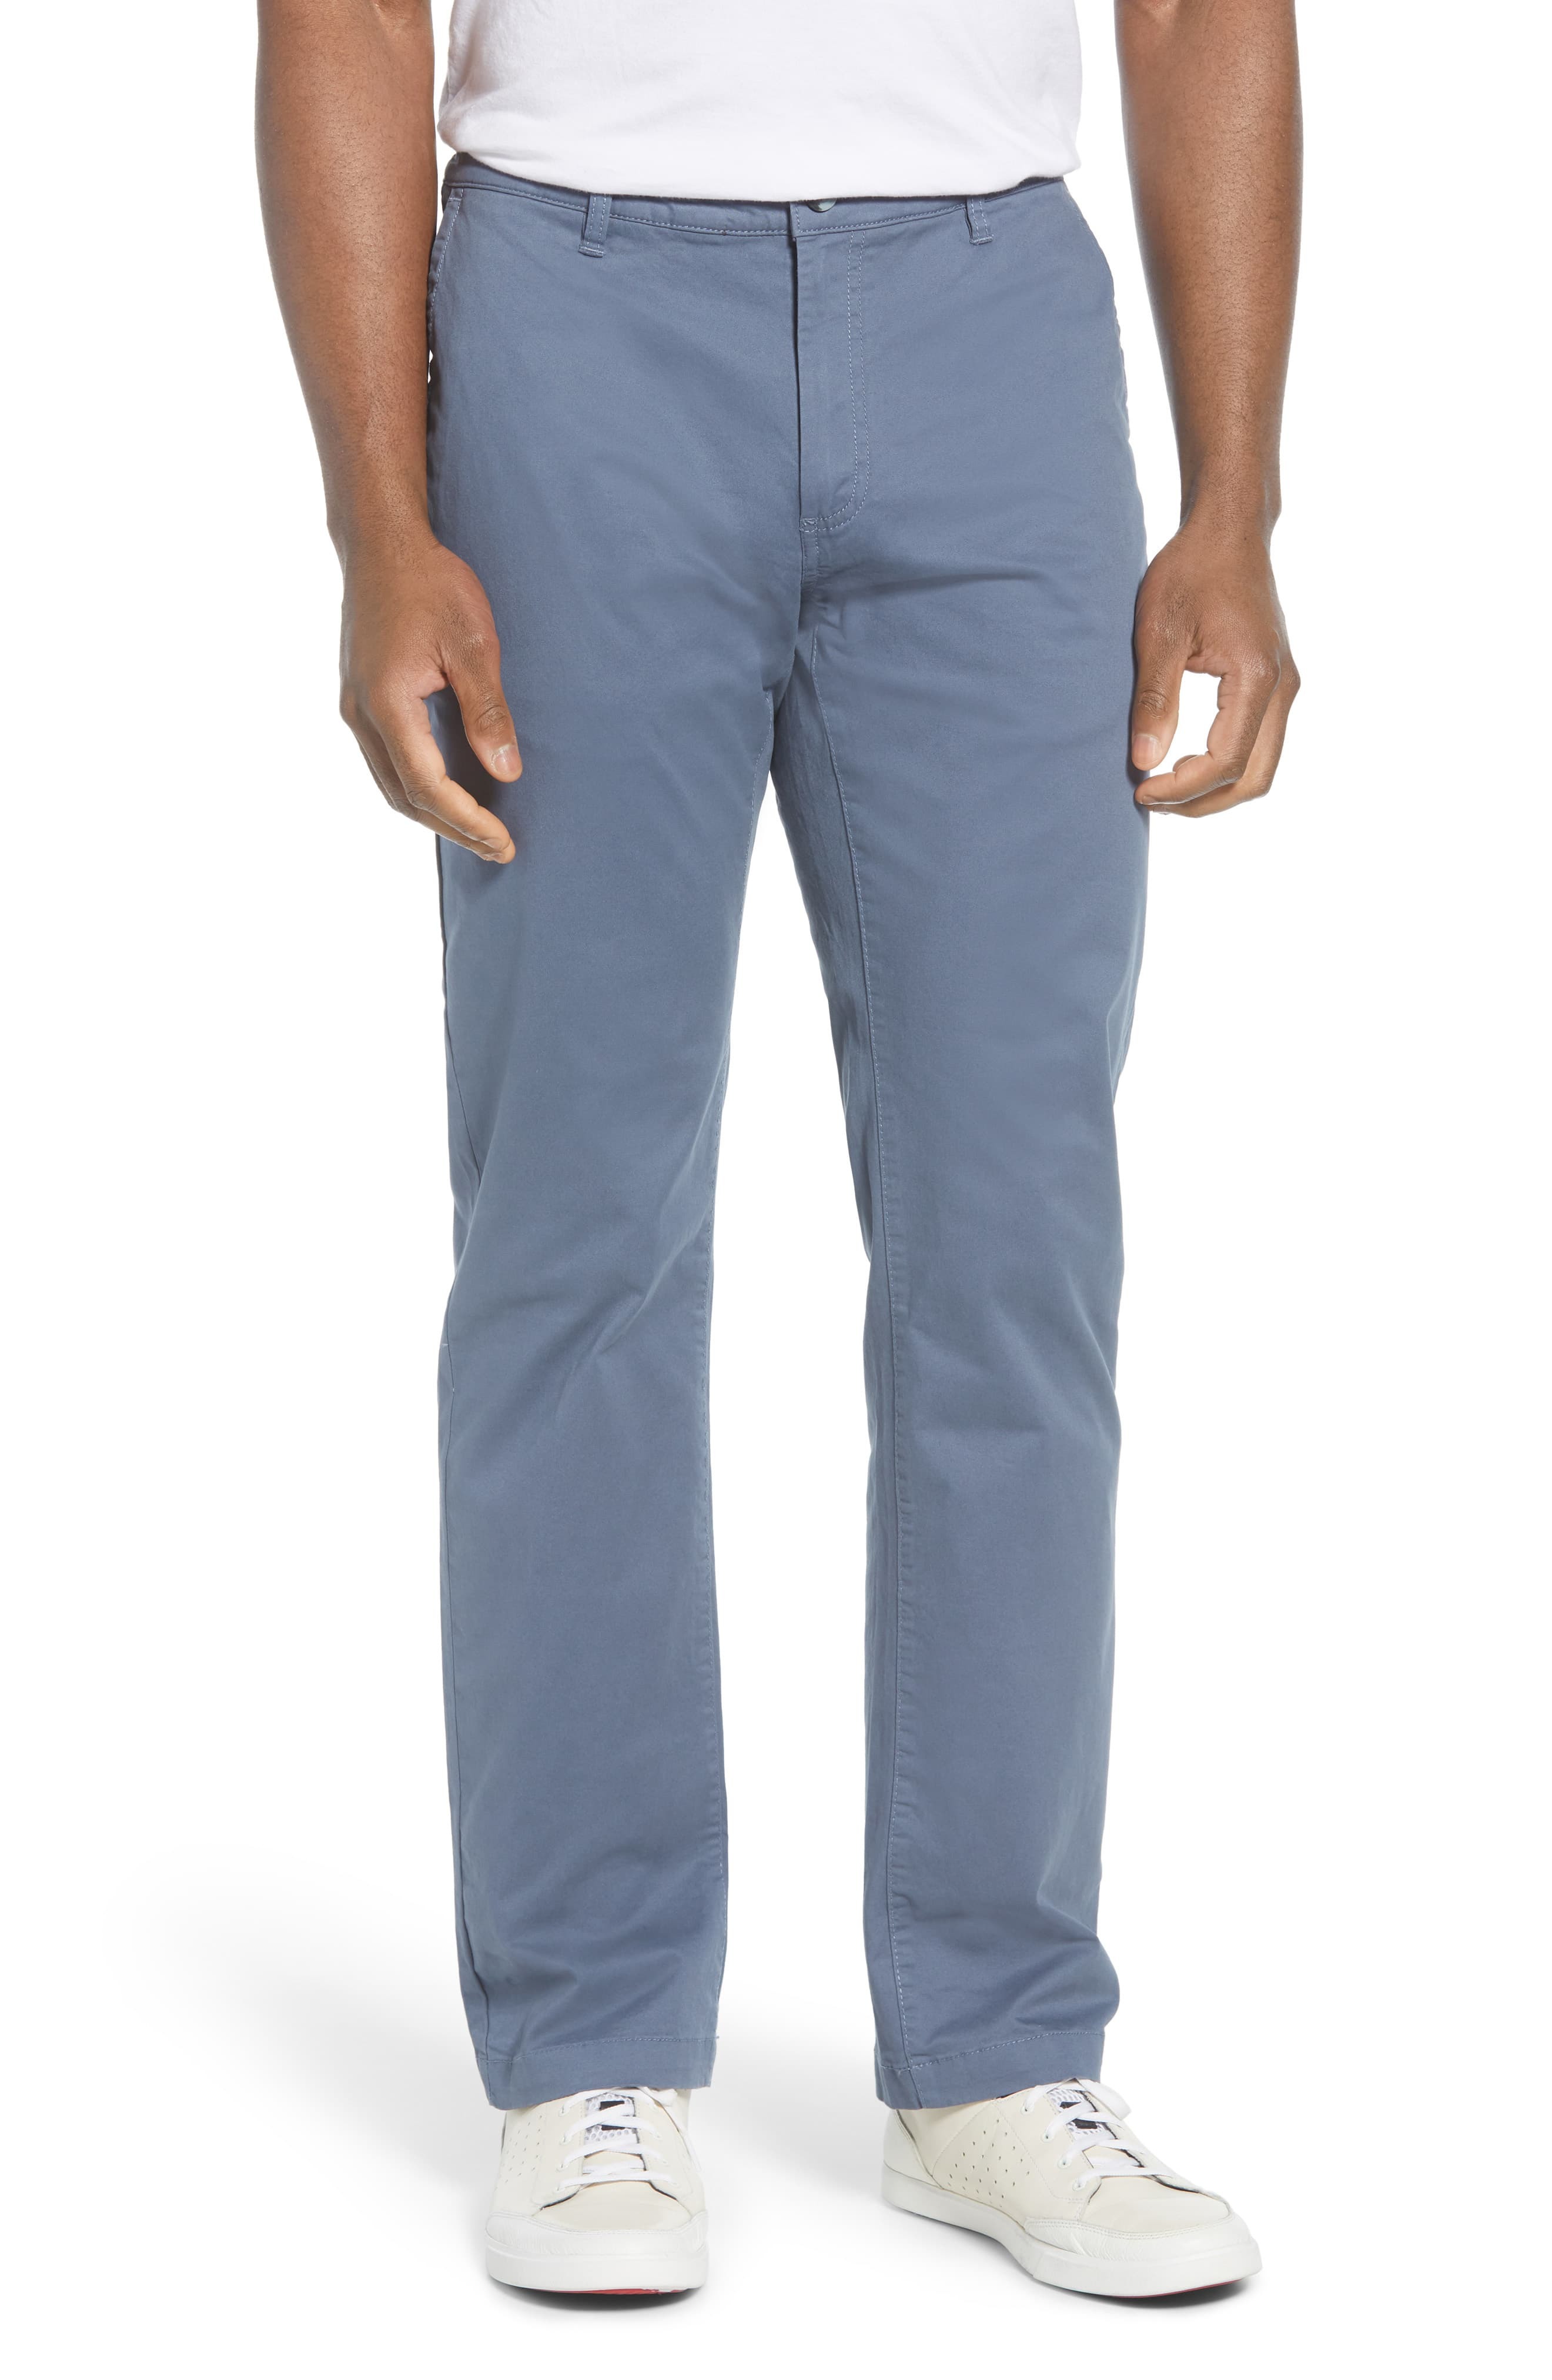 Cutter & Buck Voyager Classic Fit Stretch Cotton Chinos, $100 ...